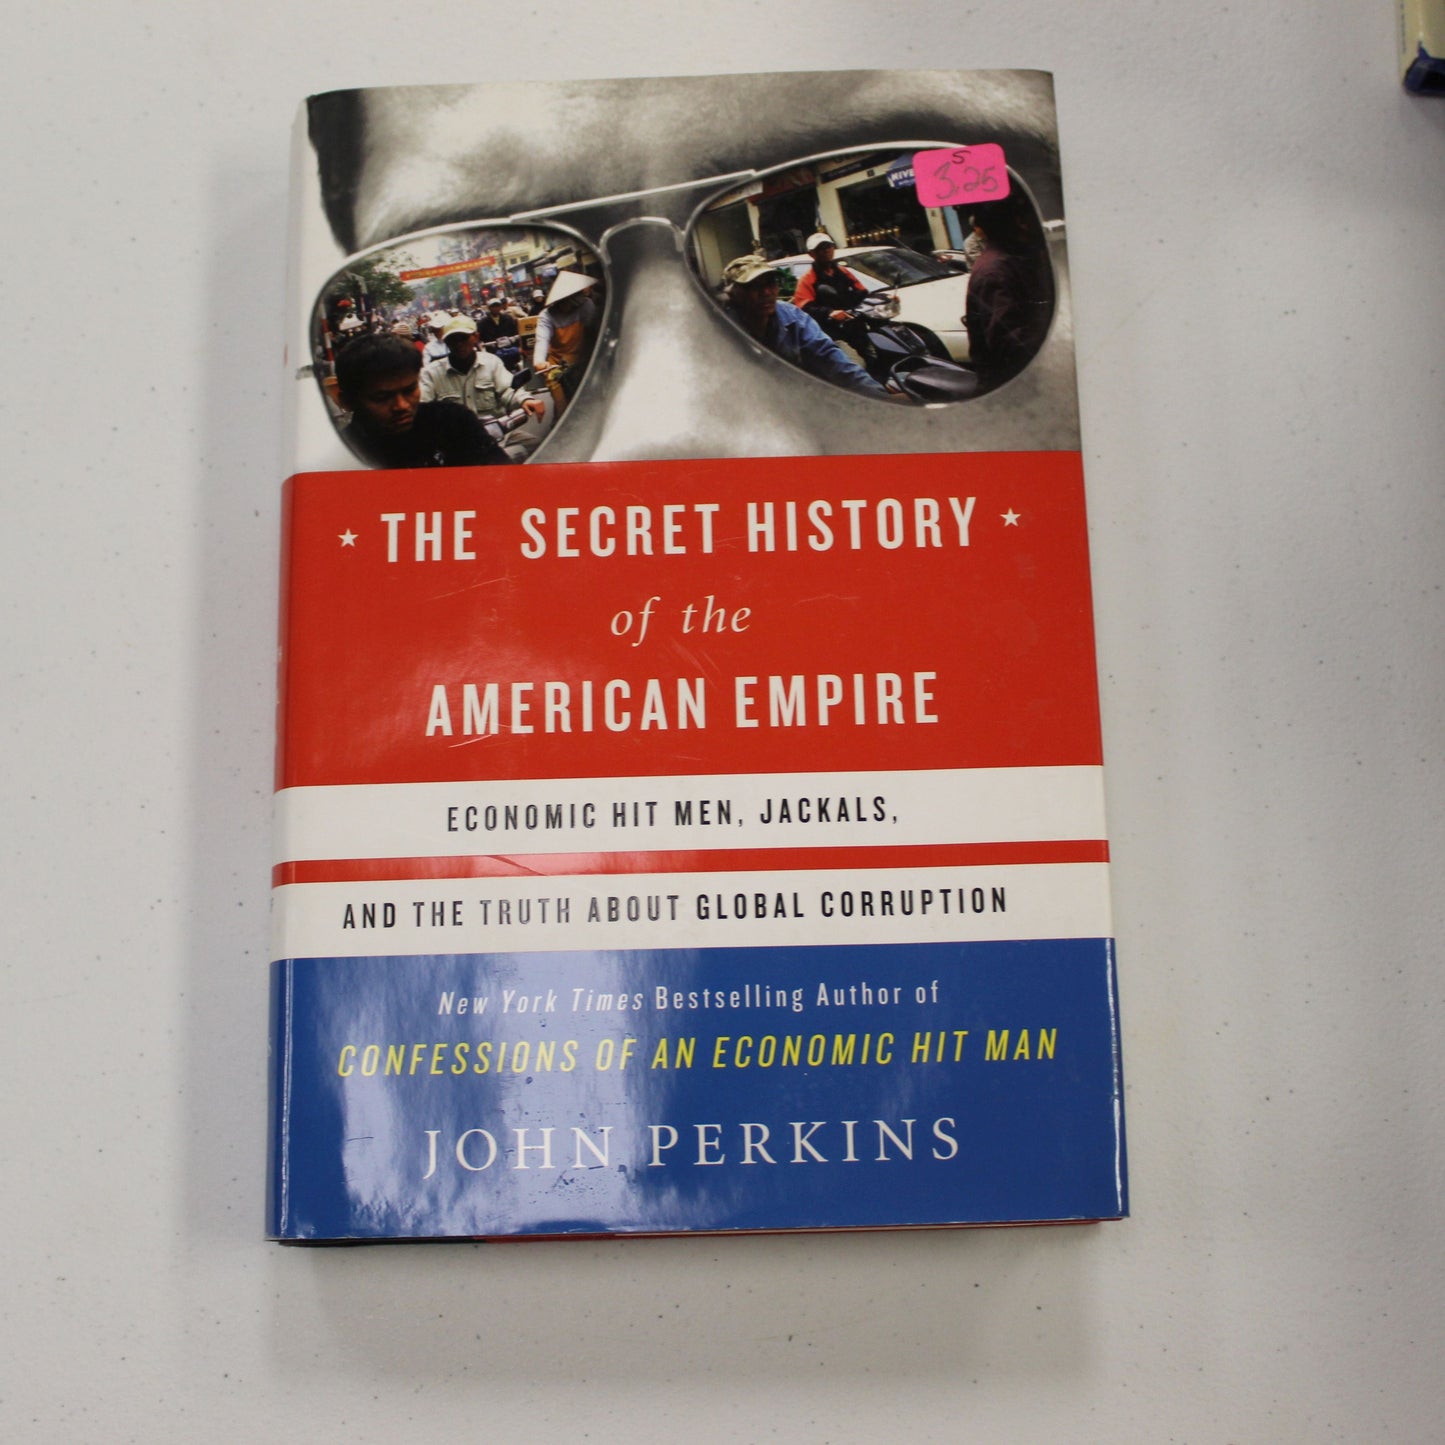 THE SECRET HISTORY OF THE AMERICAN EMPIRE